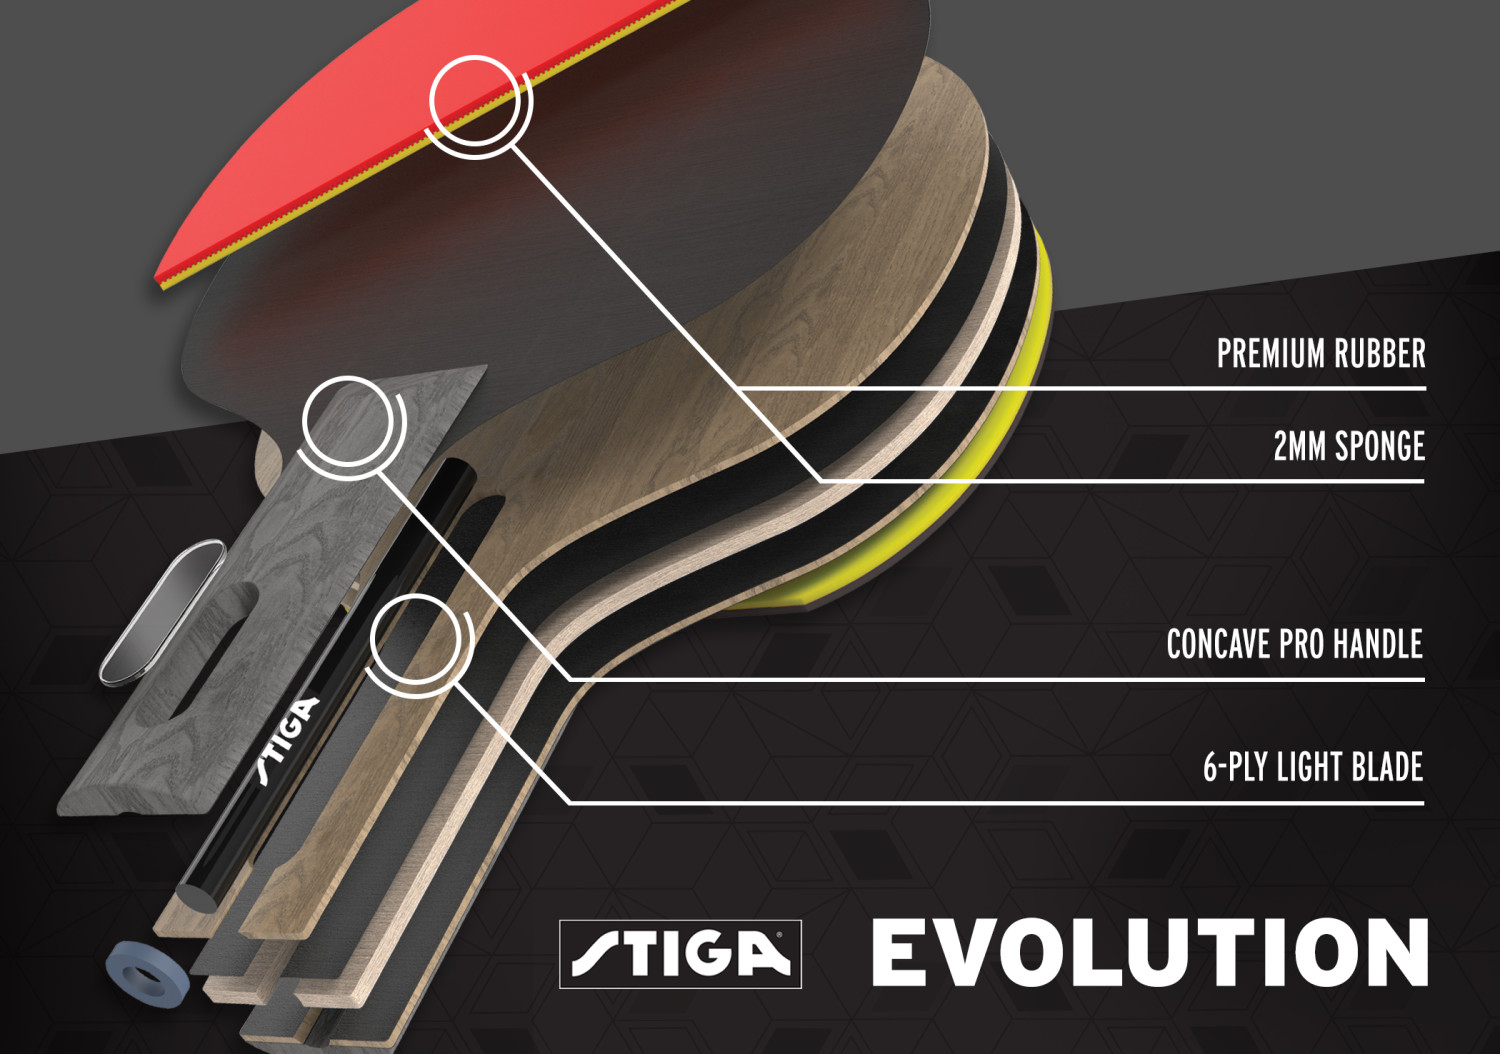 STIGA Evolution Performance-Level Table Tennis Racket Made with Approved Rubber for Tournament Play - image 3 of 15